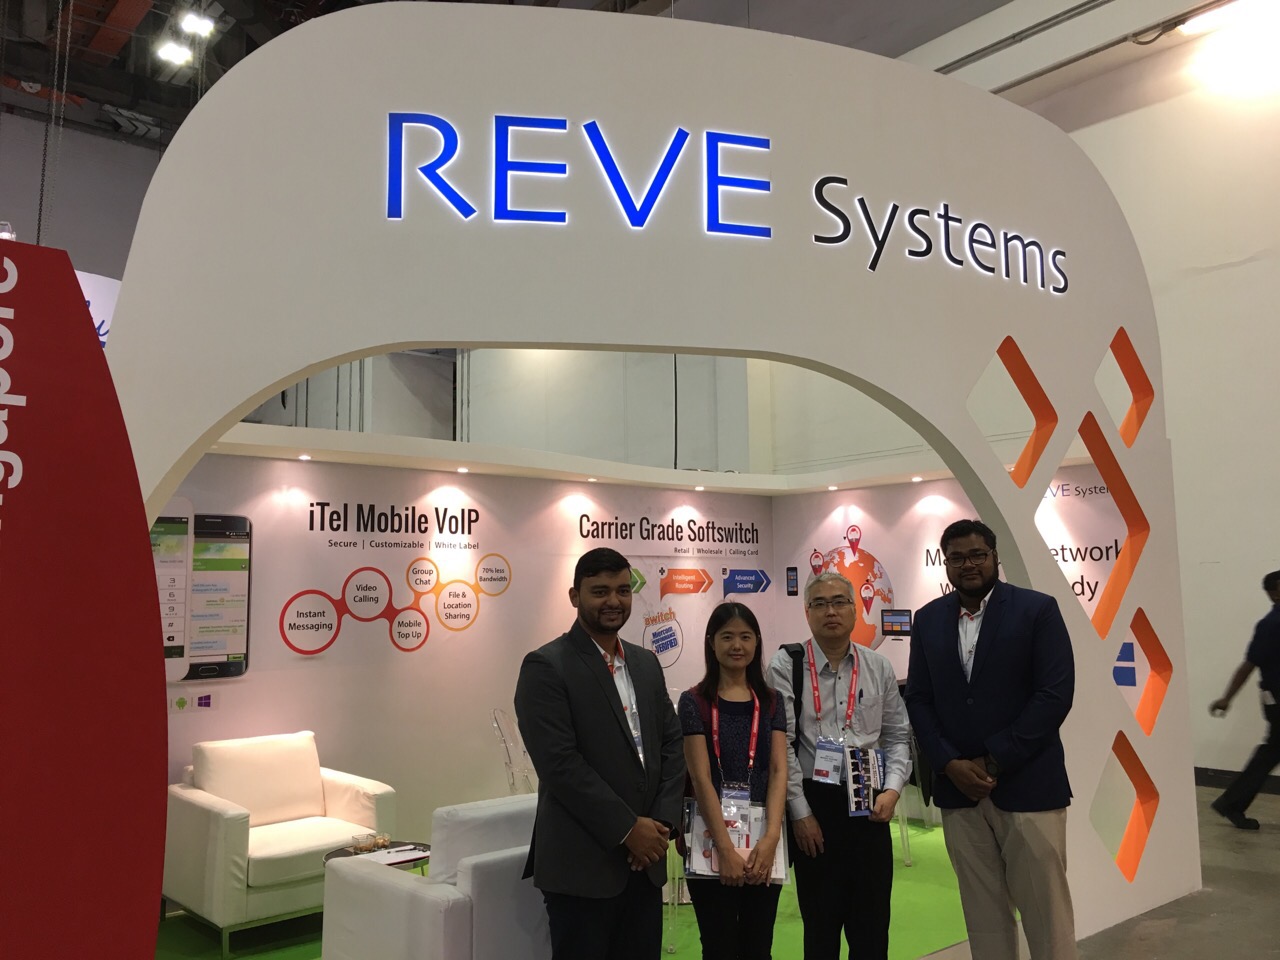 REVE SYSTEMS AT CommunicAsia 2016, Singapore 31 May-3 June, Stand# BB3-07